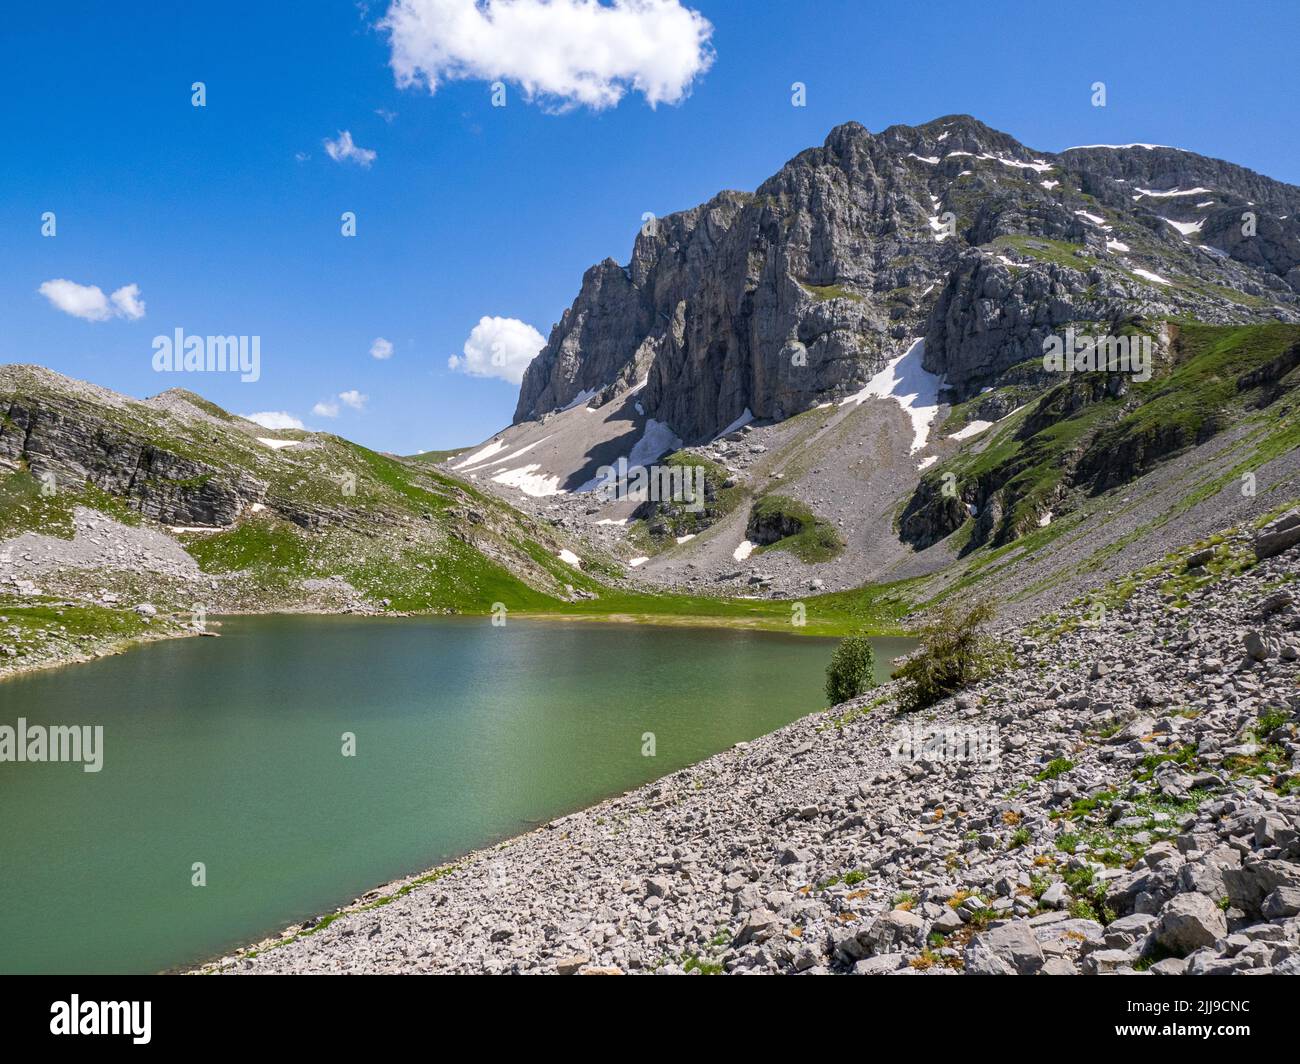 The inaccessible north face of Mount Astraka and Xerolimni lake in the Pindus Mountains of northern Greece Stock Photo